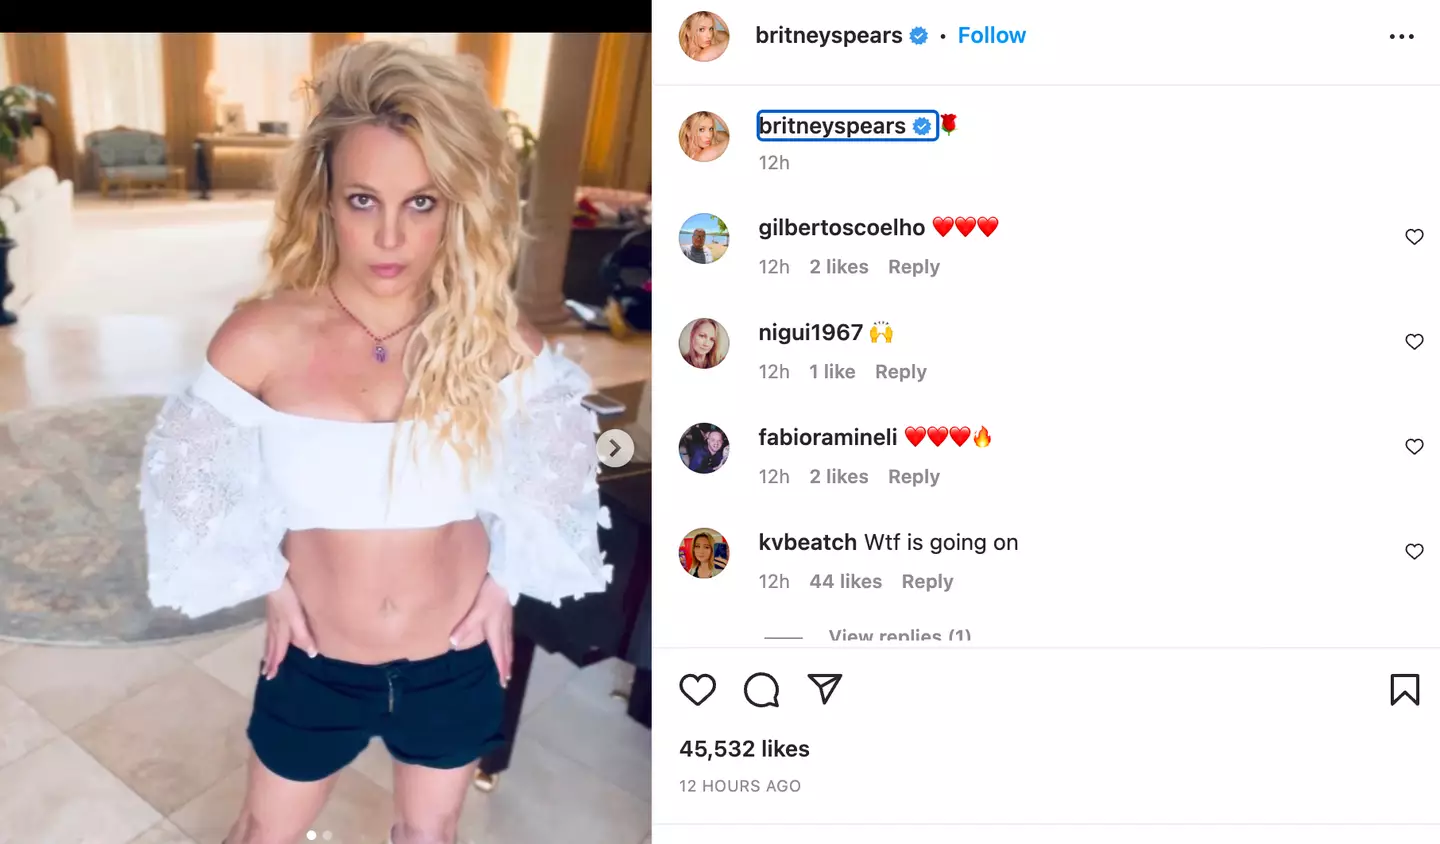 Some fans have speculated other people may be controlling Spears' Instagram page.